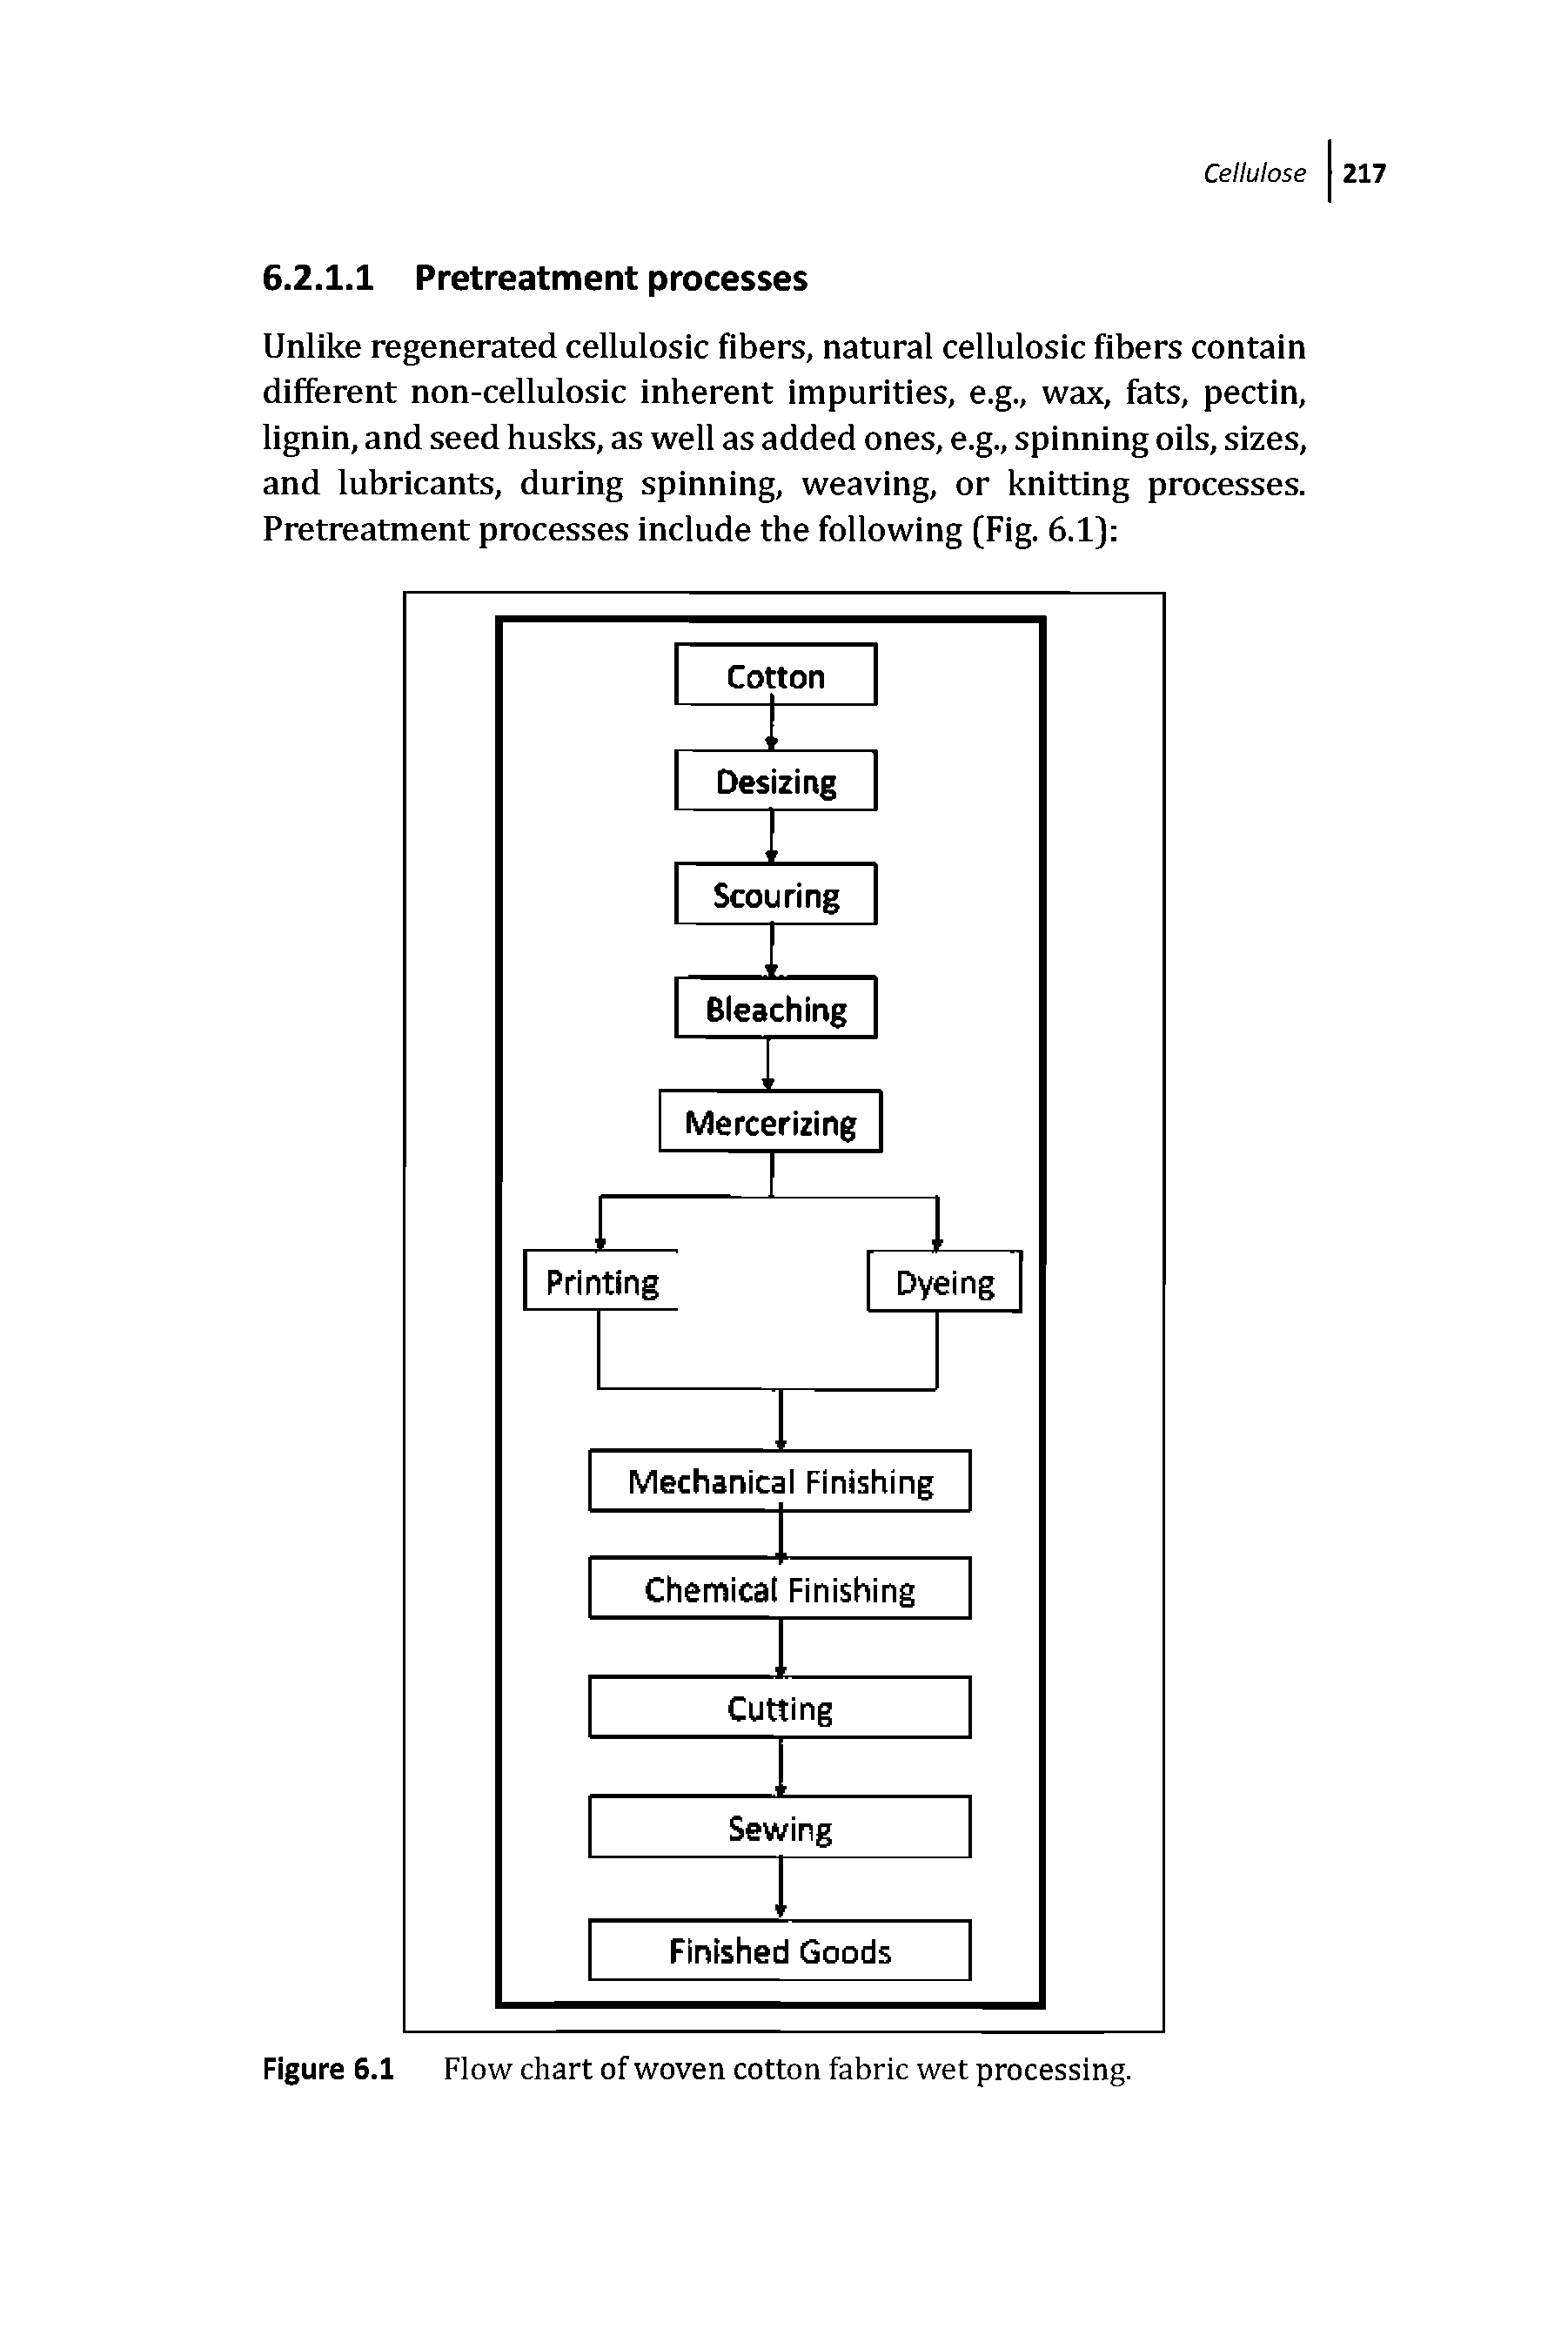 Figure 6.1 Flow chart of woven cotton fabric wet processing.